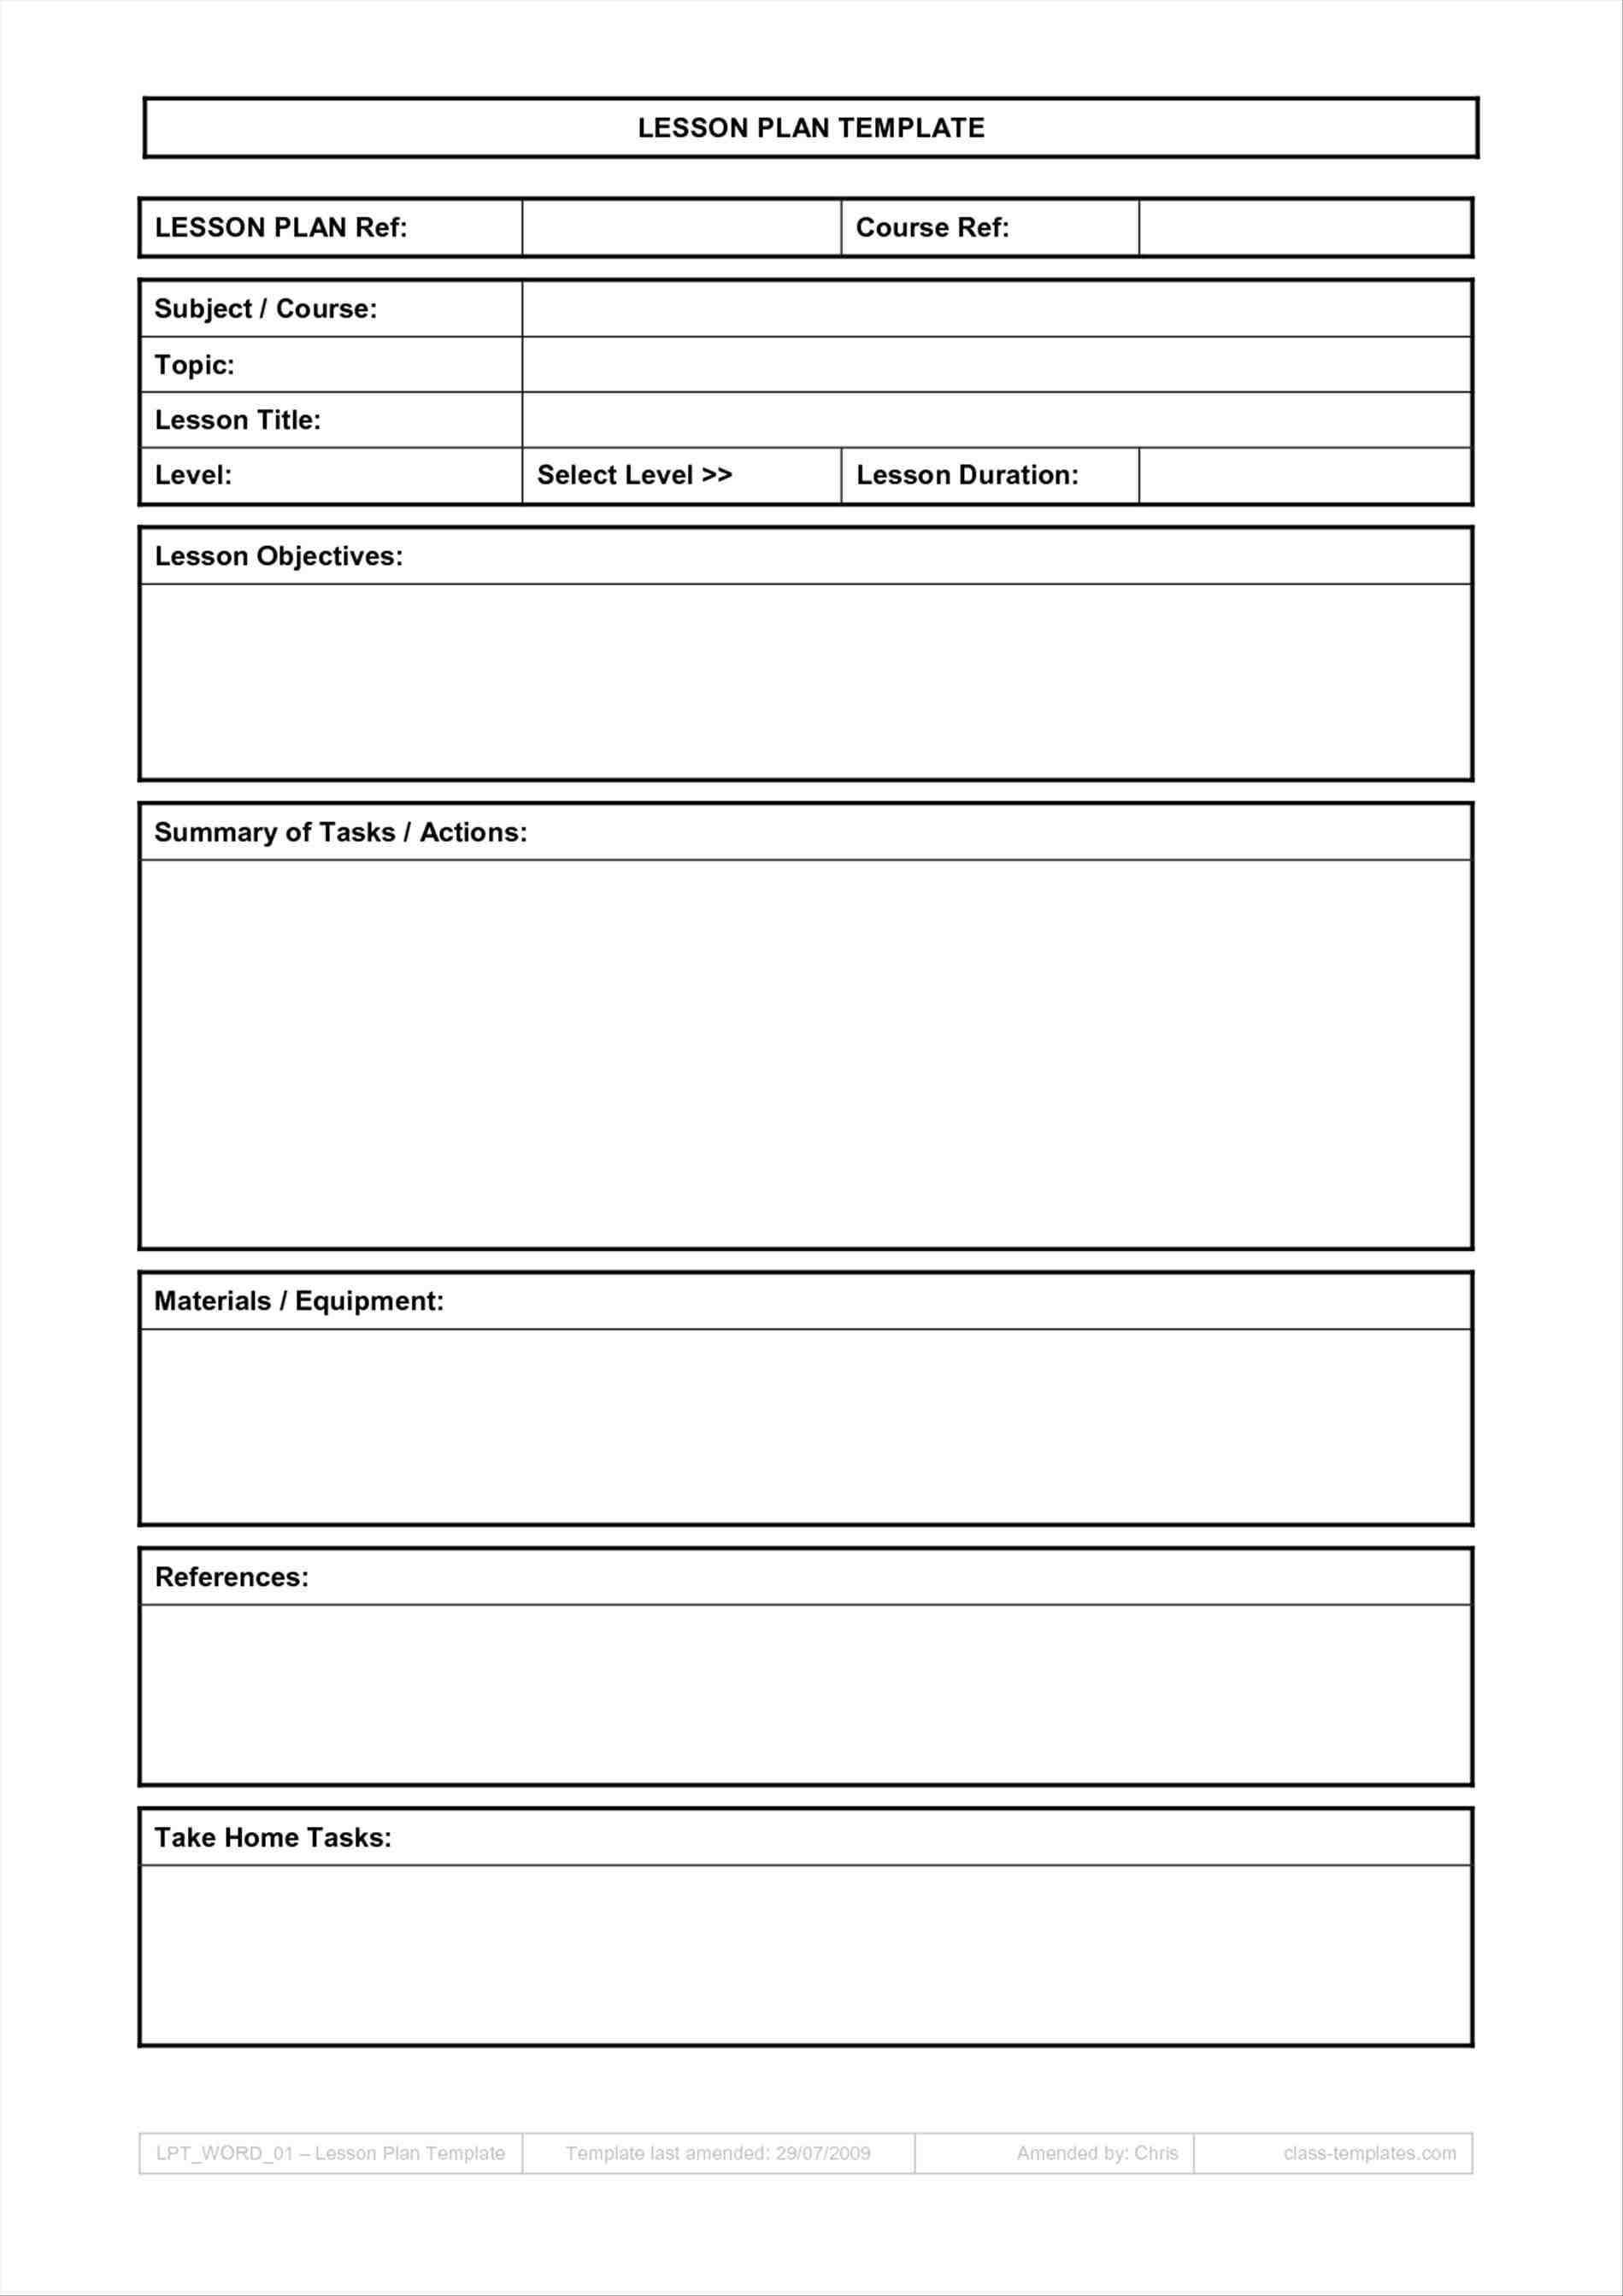 Common Core Lesson Plan Template High School In 2019 Intended For Teacher Plan Book Template Word